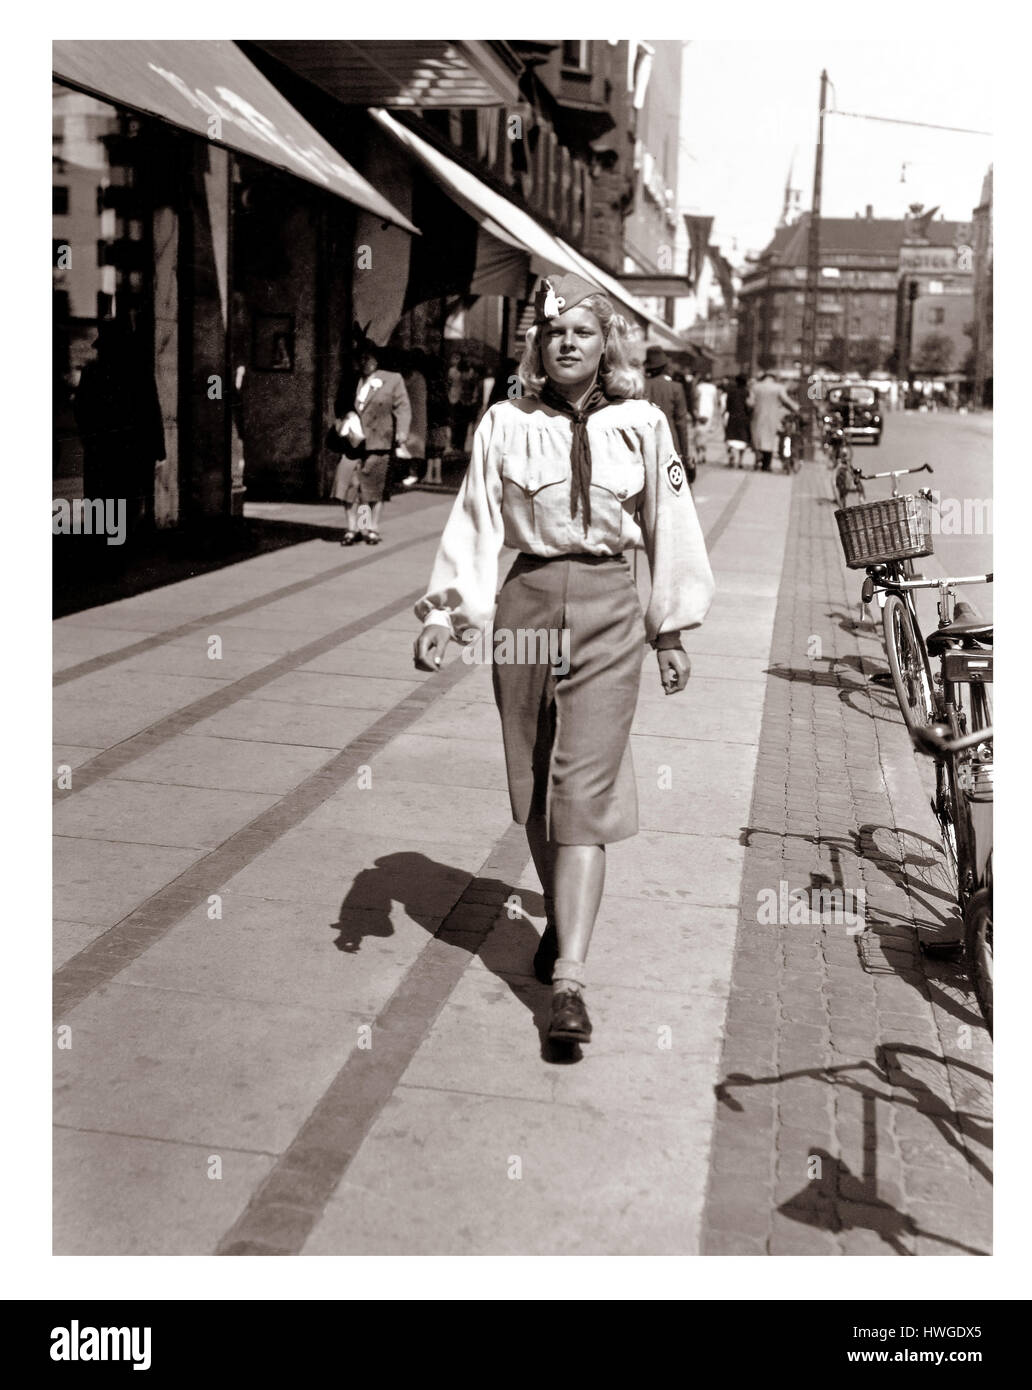 Denmark Nazi Party 1930’s Teenage blond girl takes pride walking in the uniform of The National Socialist Workers' Party of Denmark  (Nationalsocialistiske Arbejderparti; DNSAP)  the largest Nazi Party in Denmark before and during the Second World War. WW2 World War II Stock Photo